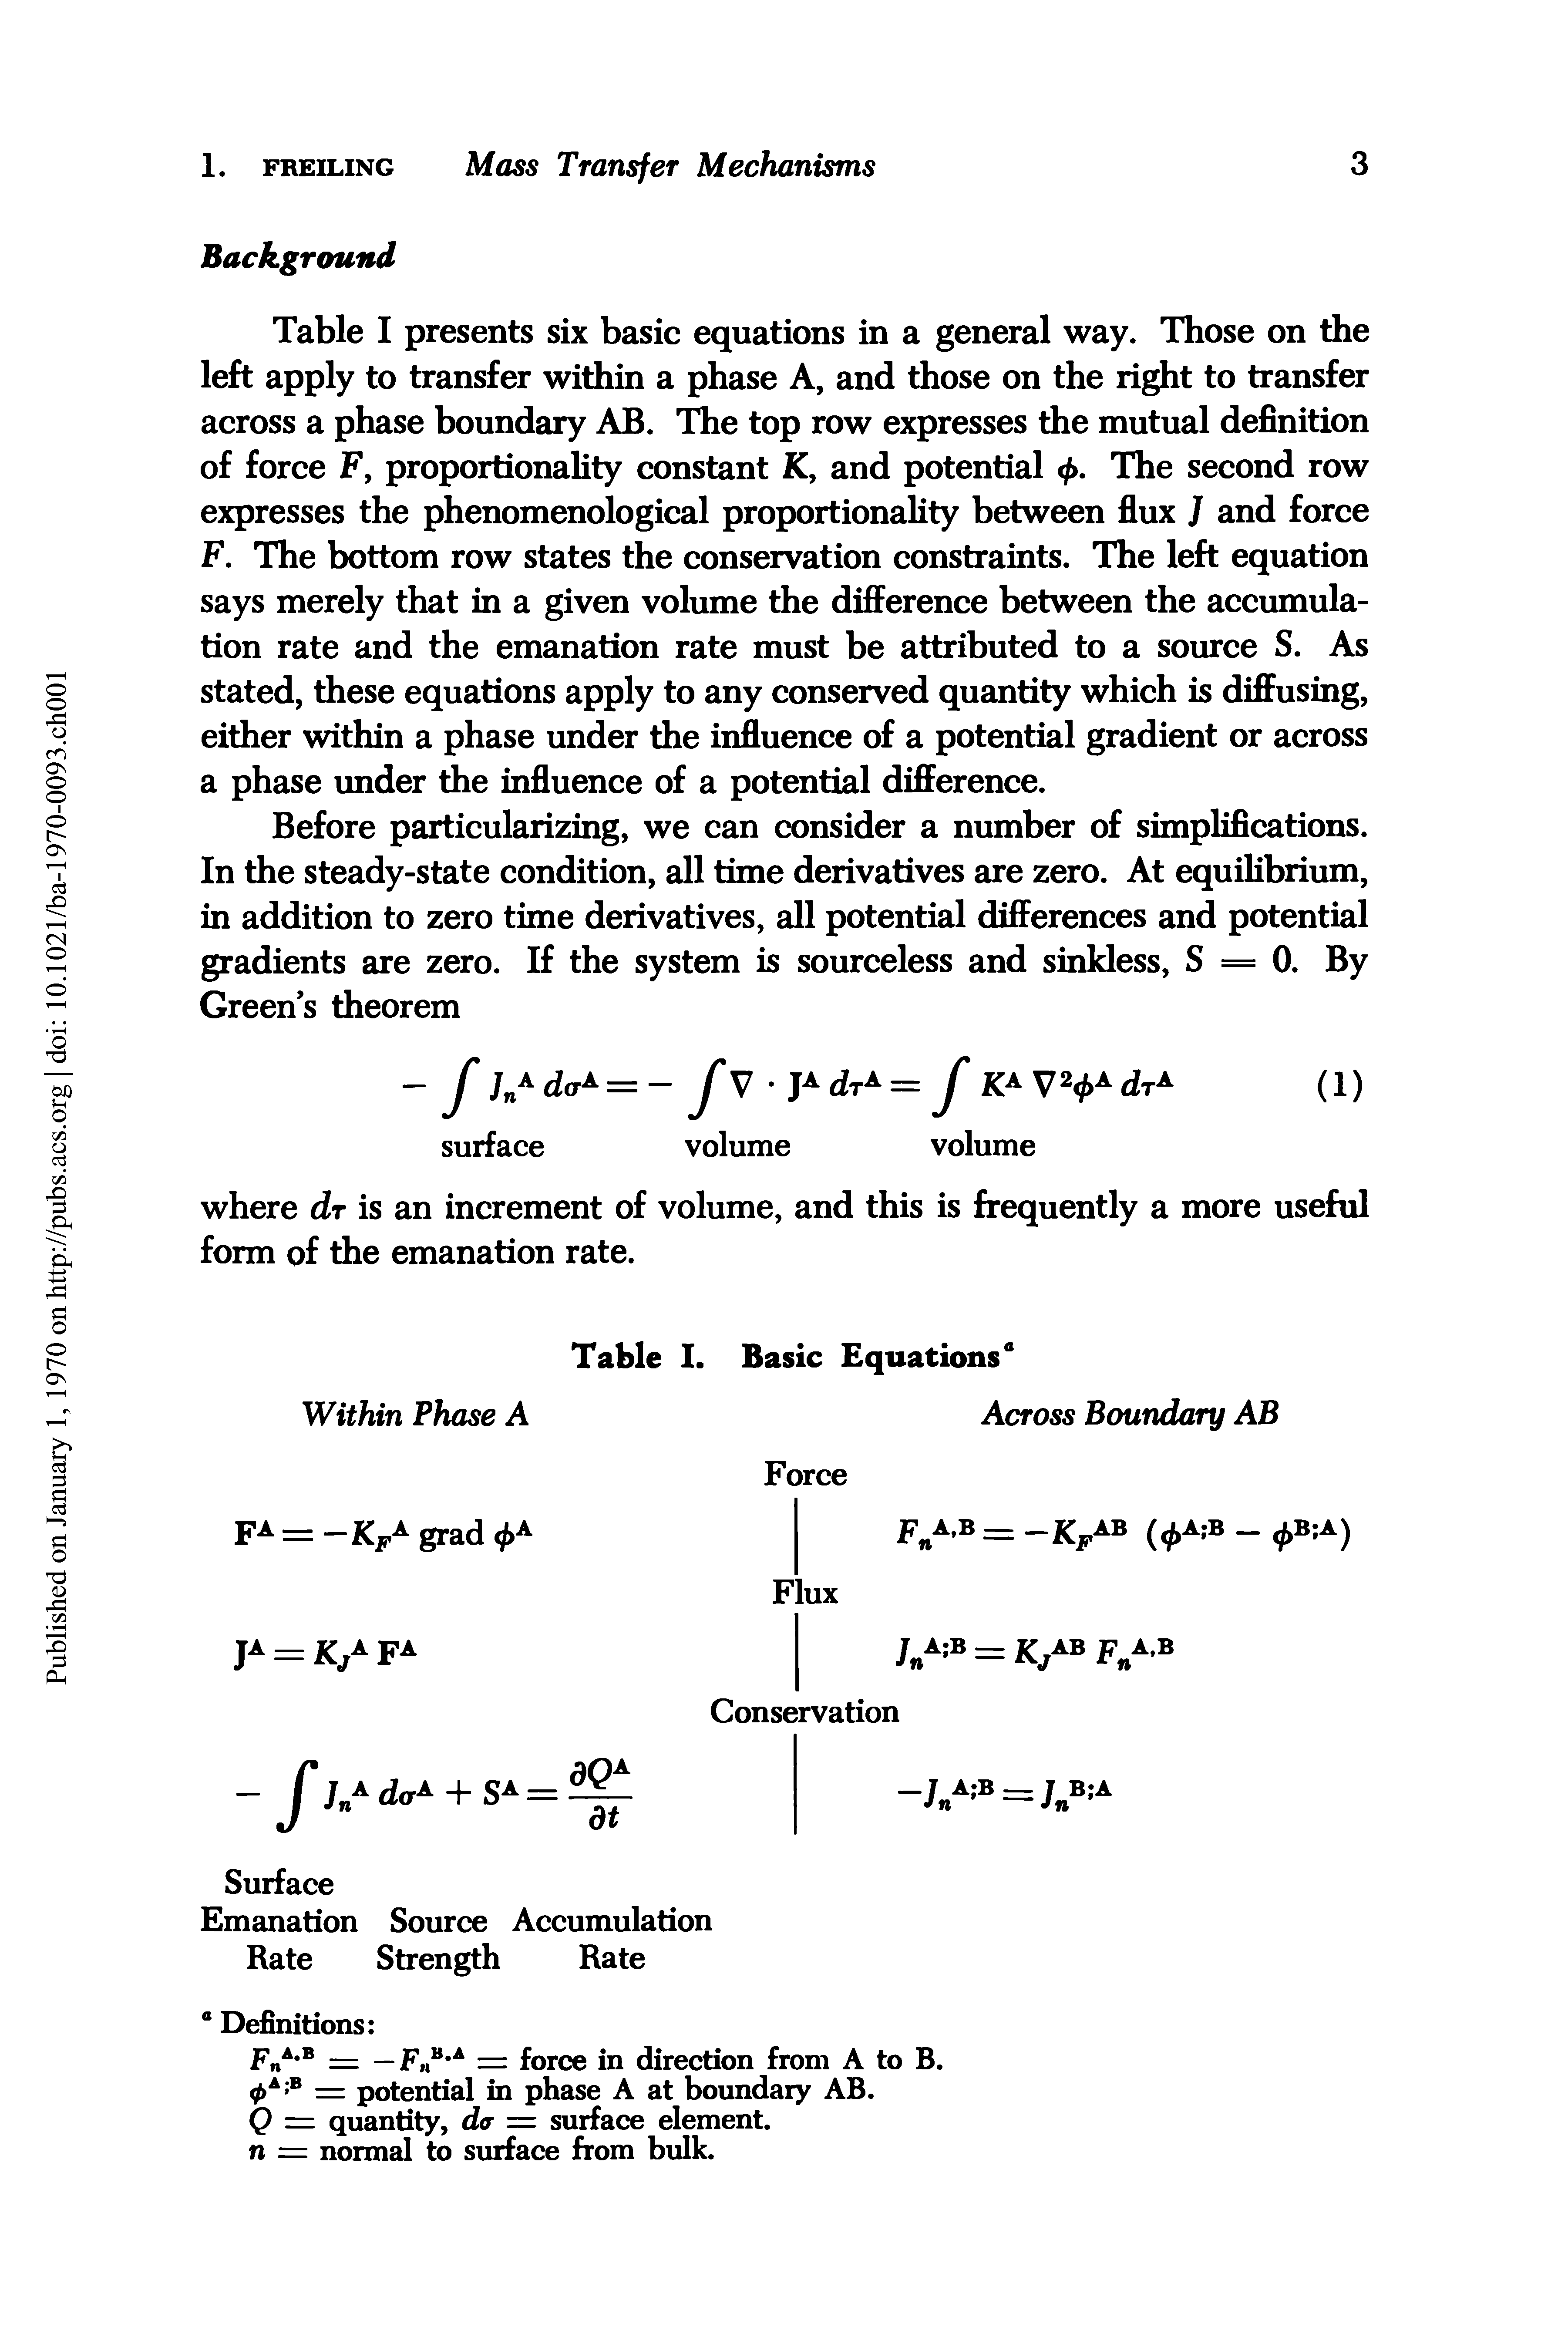 Table I presents six basic equations in a general way. Those on the left apply to transfer within a phase A, and those on the right to transfer across a phase boundary AB. The top row expresses the mutual definition of force F, proportionality constant K, and potential <f>. The second row expresses the phenomenological proportionality between flux J and force F. The bottom row states the conservation constraints. The left equation says merely that in a given volume the difference between the accumulation rate and the emanation rate must be attributed to a source S. As stated, these equations apply to any conserved quantity which is diffusing, either within a phase under the influence of a potential gradient or across a phase under the influence of a potential difference.